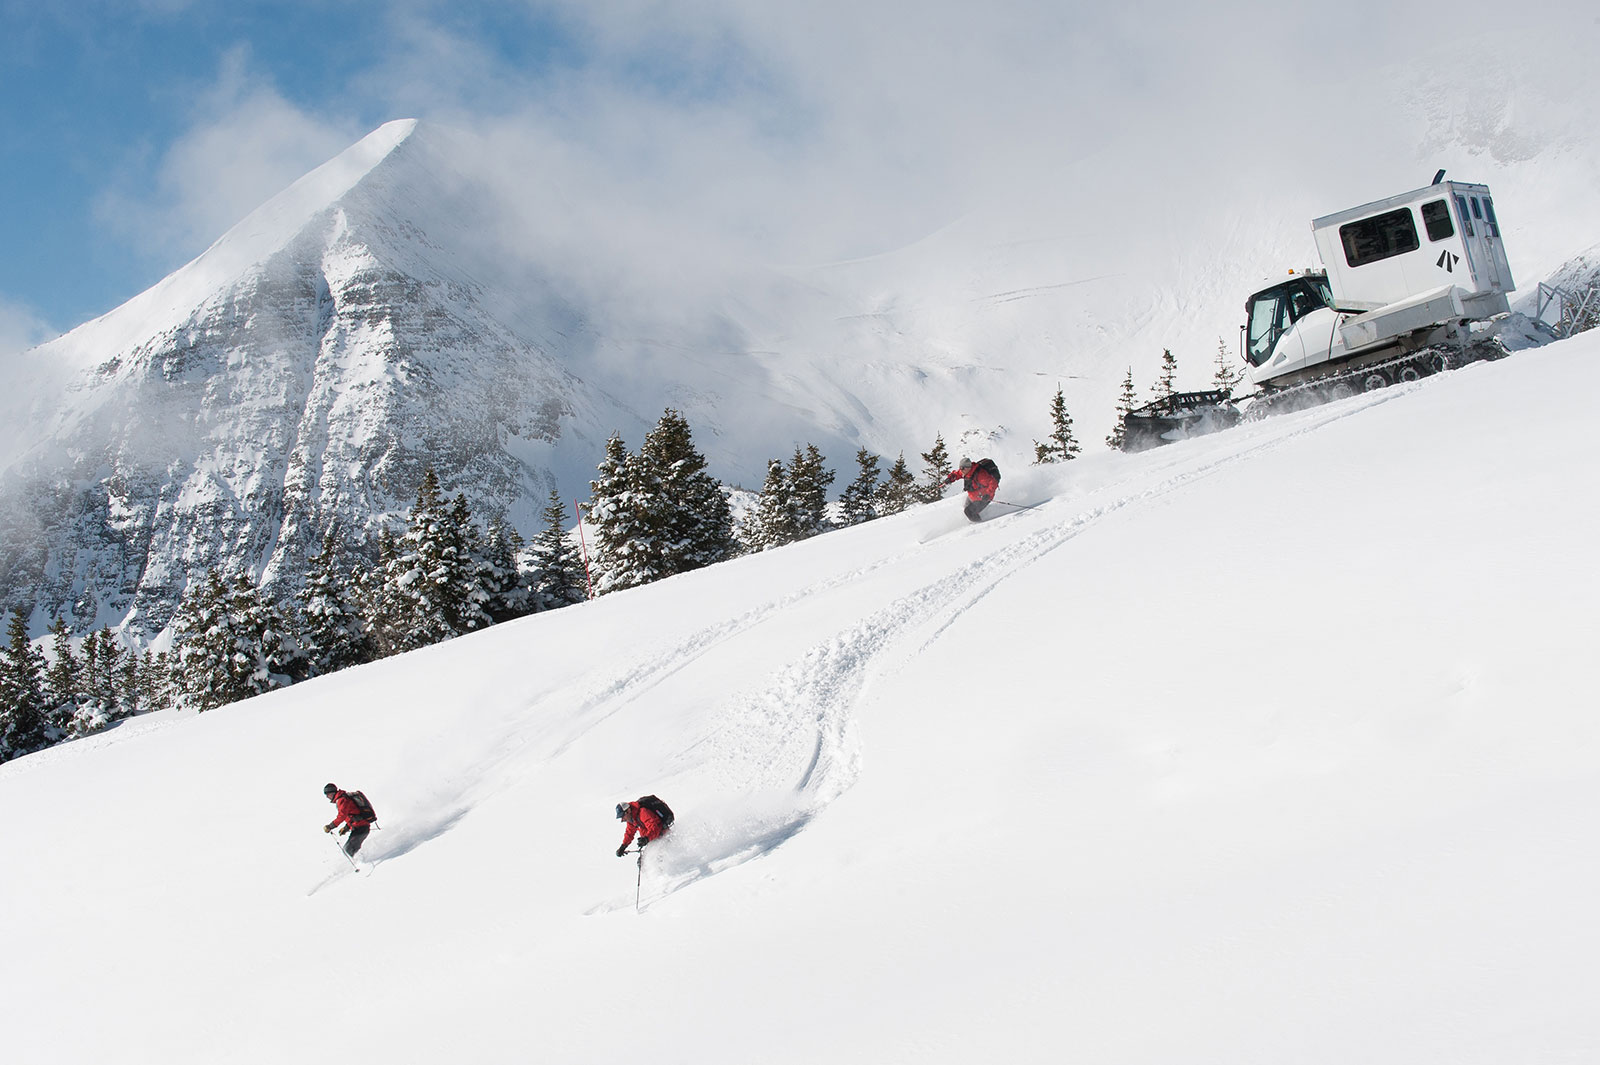 Private skiing excursions near crested butte. 